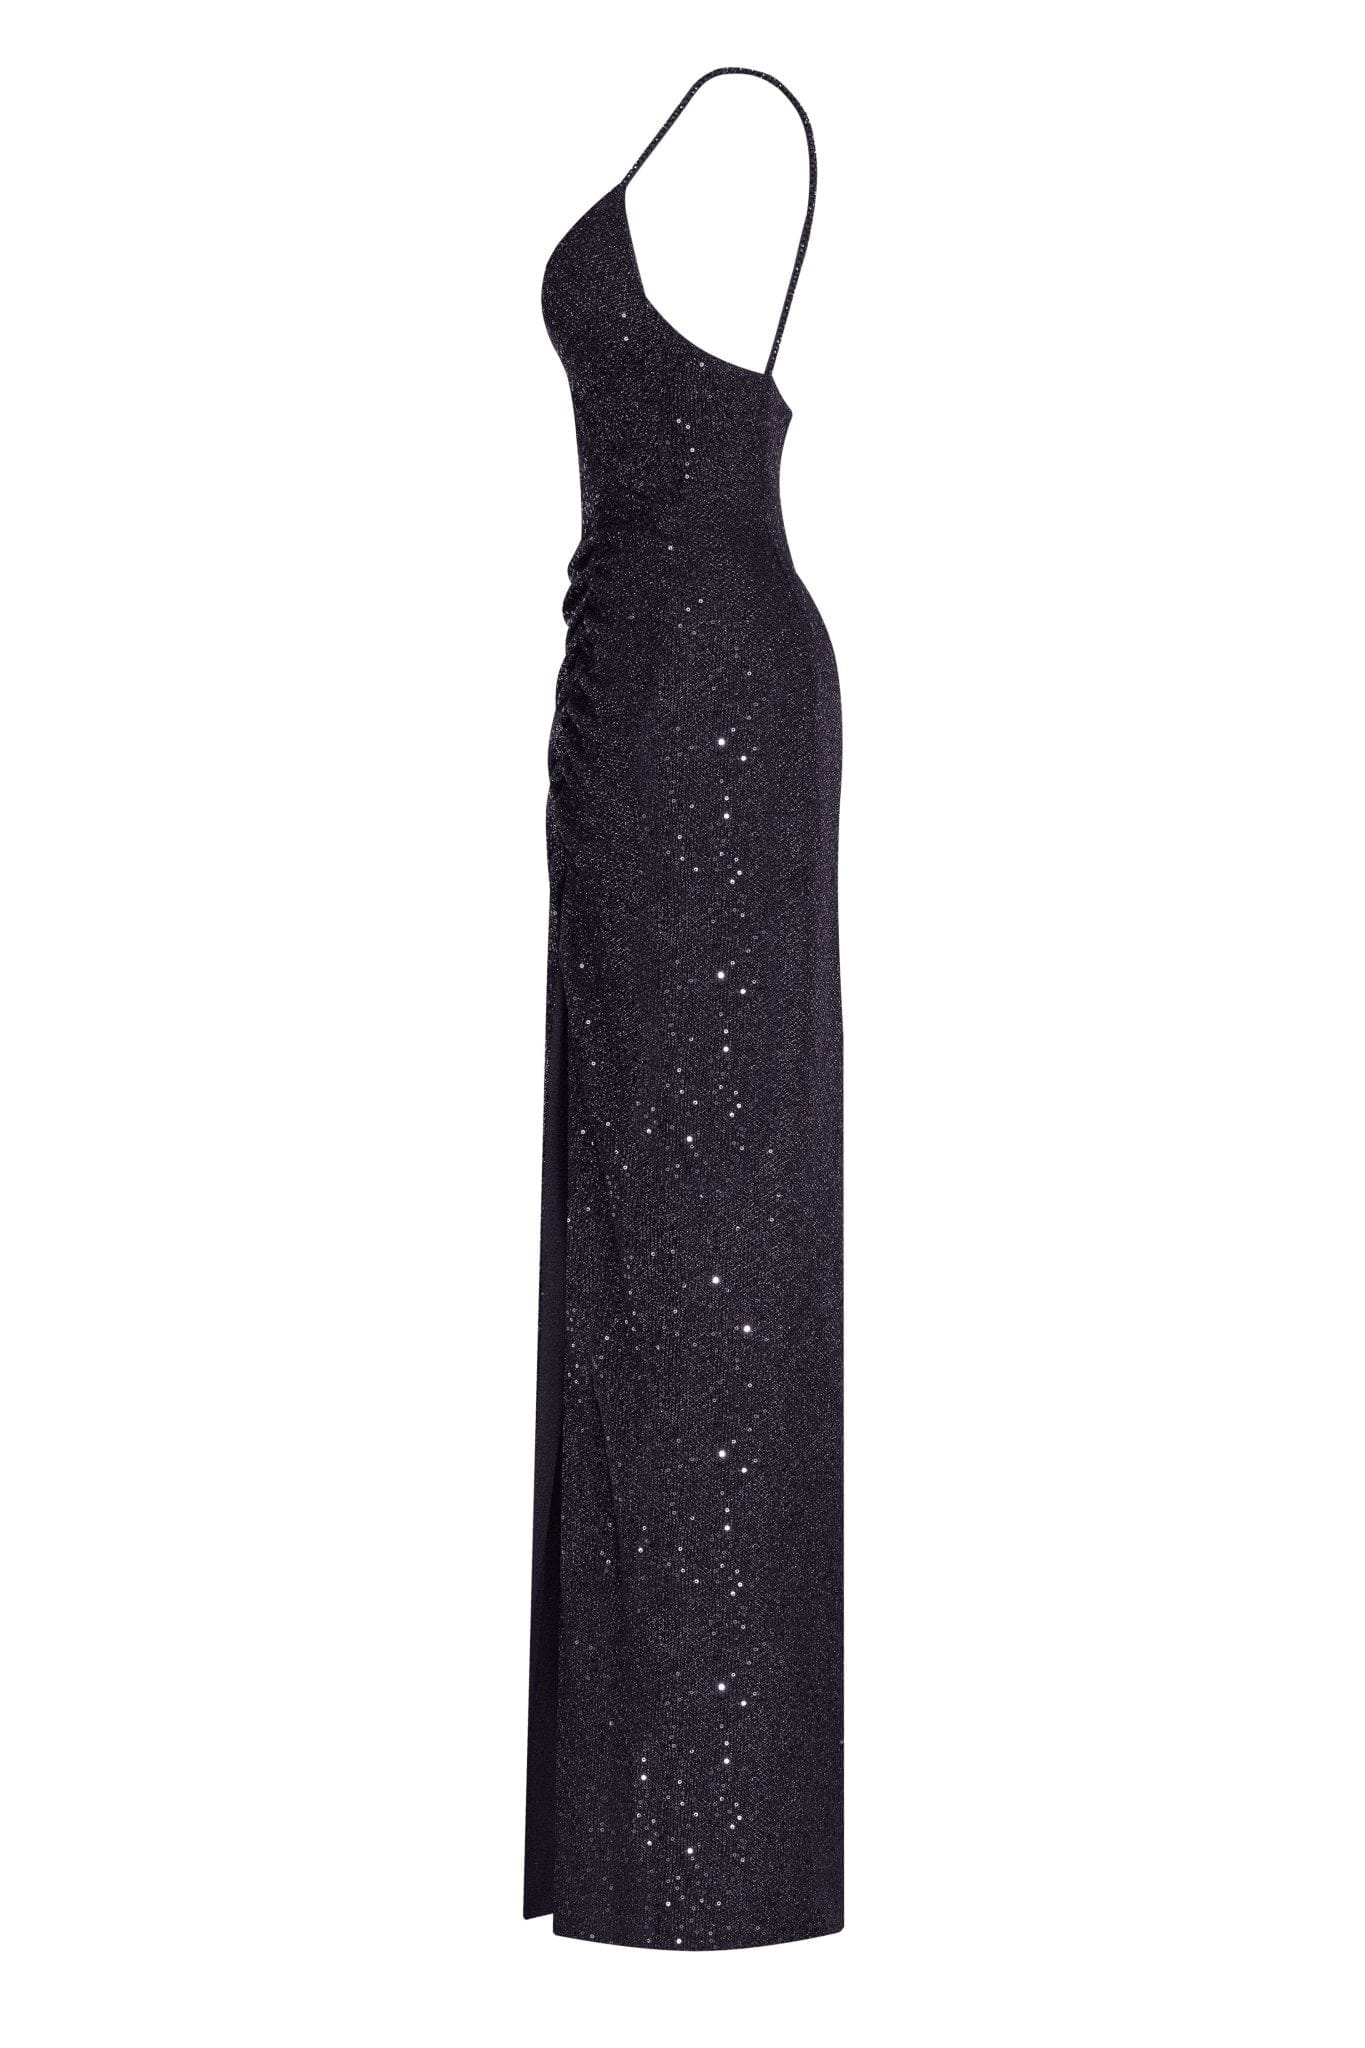 Spectacular sequined maxi gown on long spaghetti straps - Milla